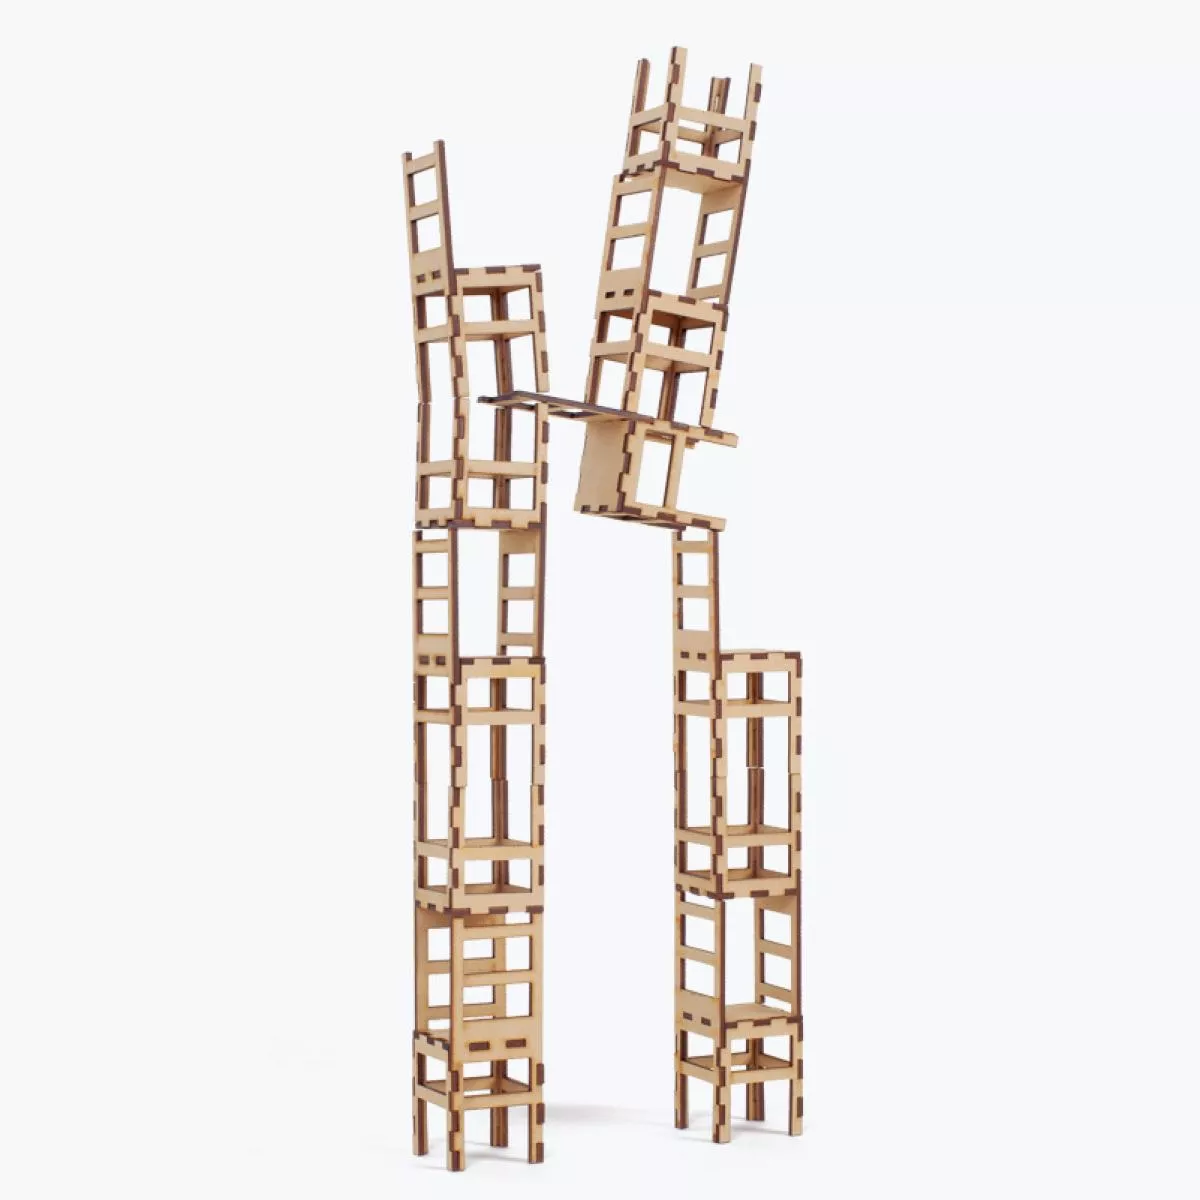 Artistic Stacking Game with 29 Wooden Chairs